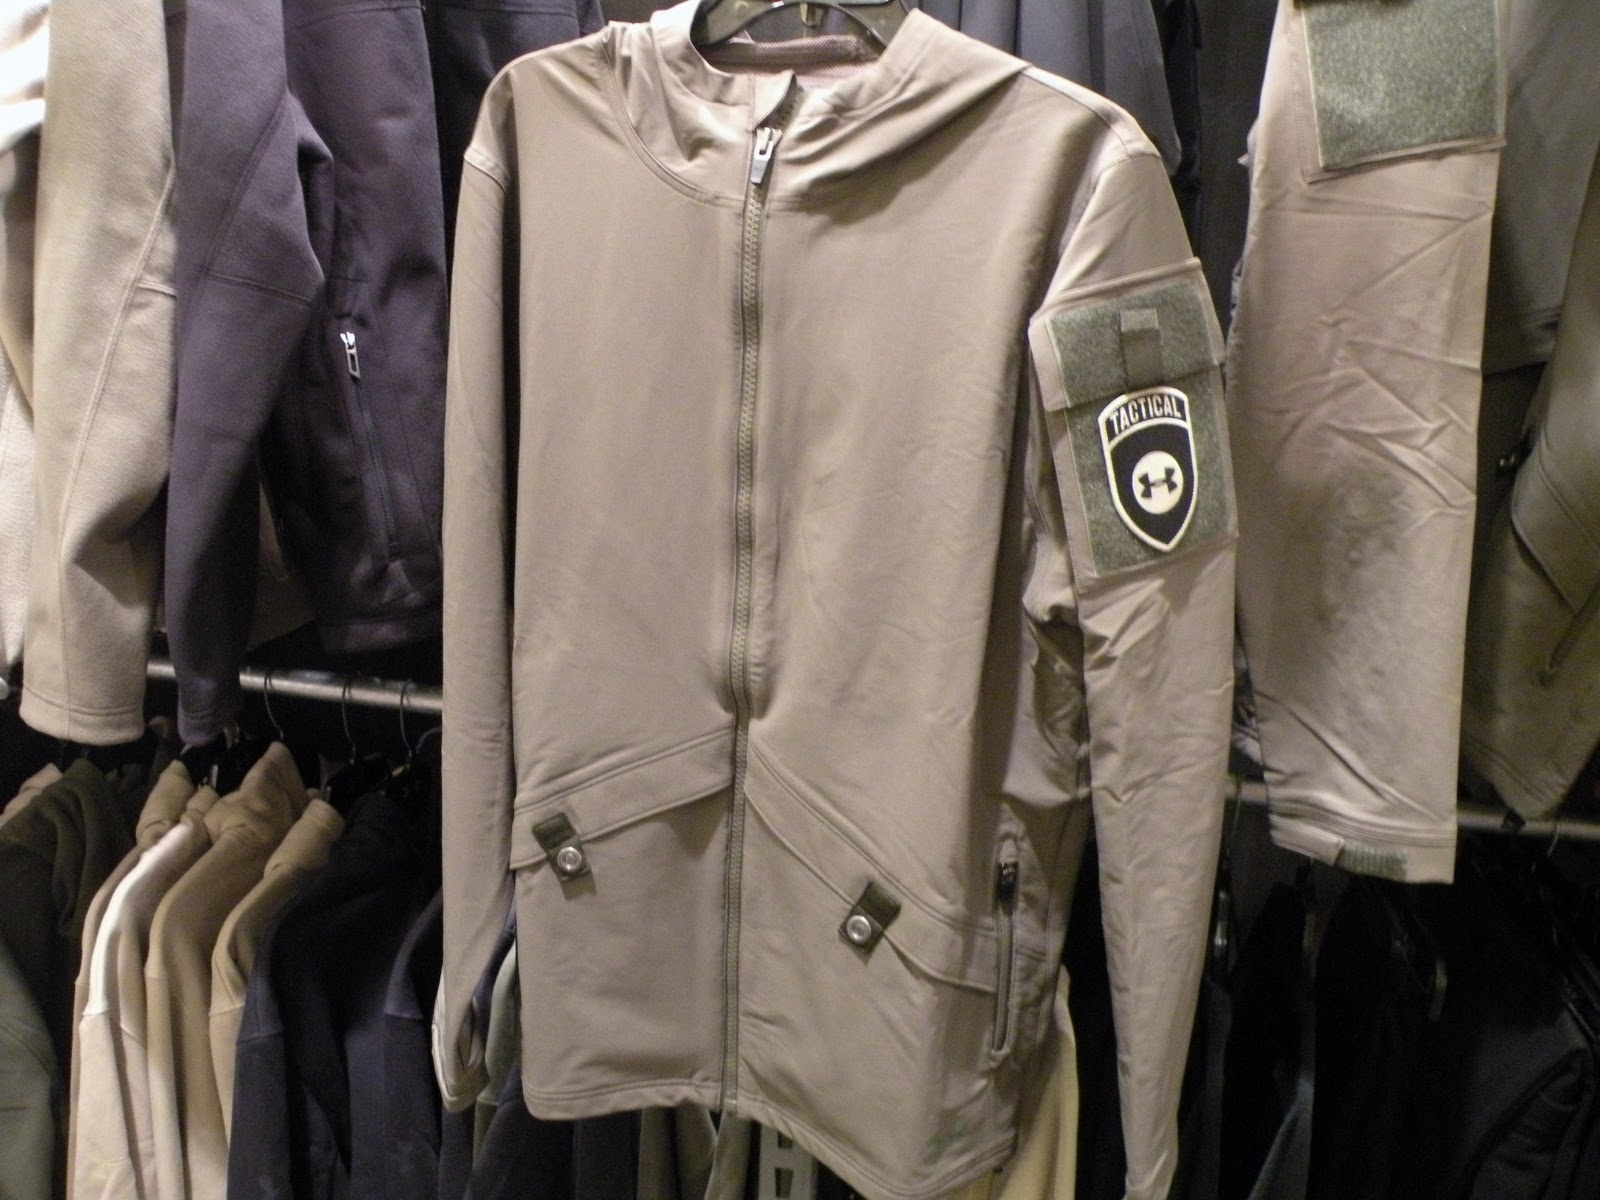 under armour tactical softshell